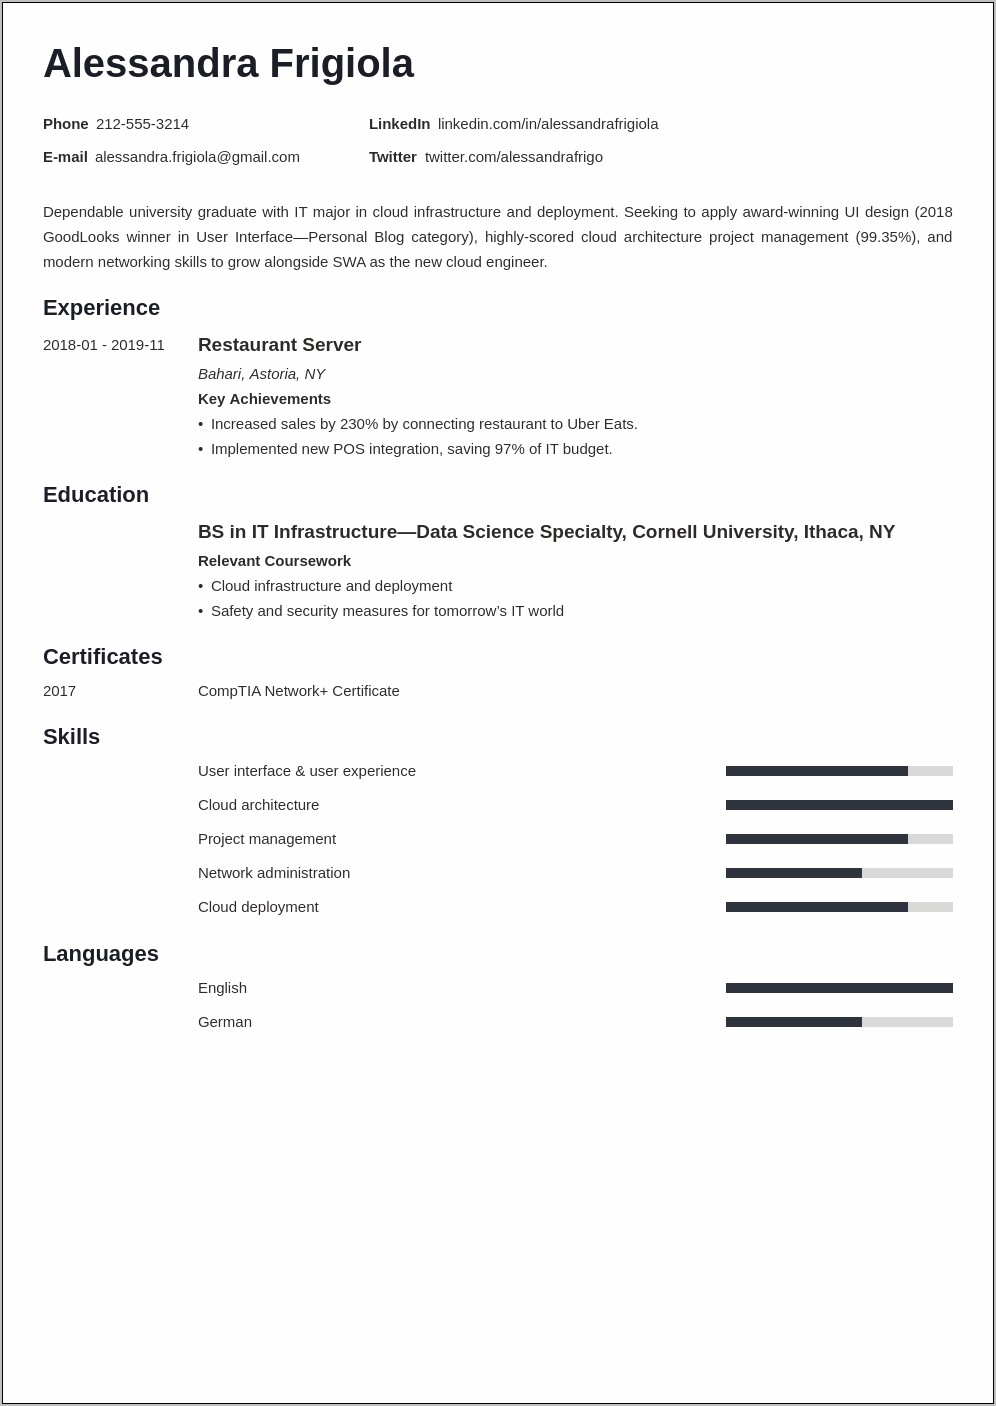 Exampes Of Resume For Jobs